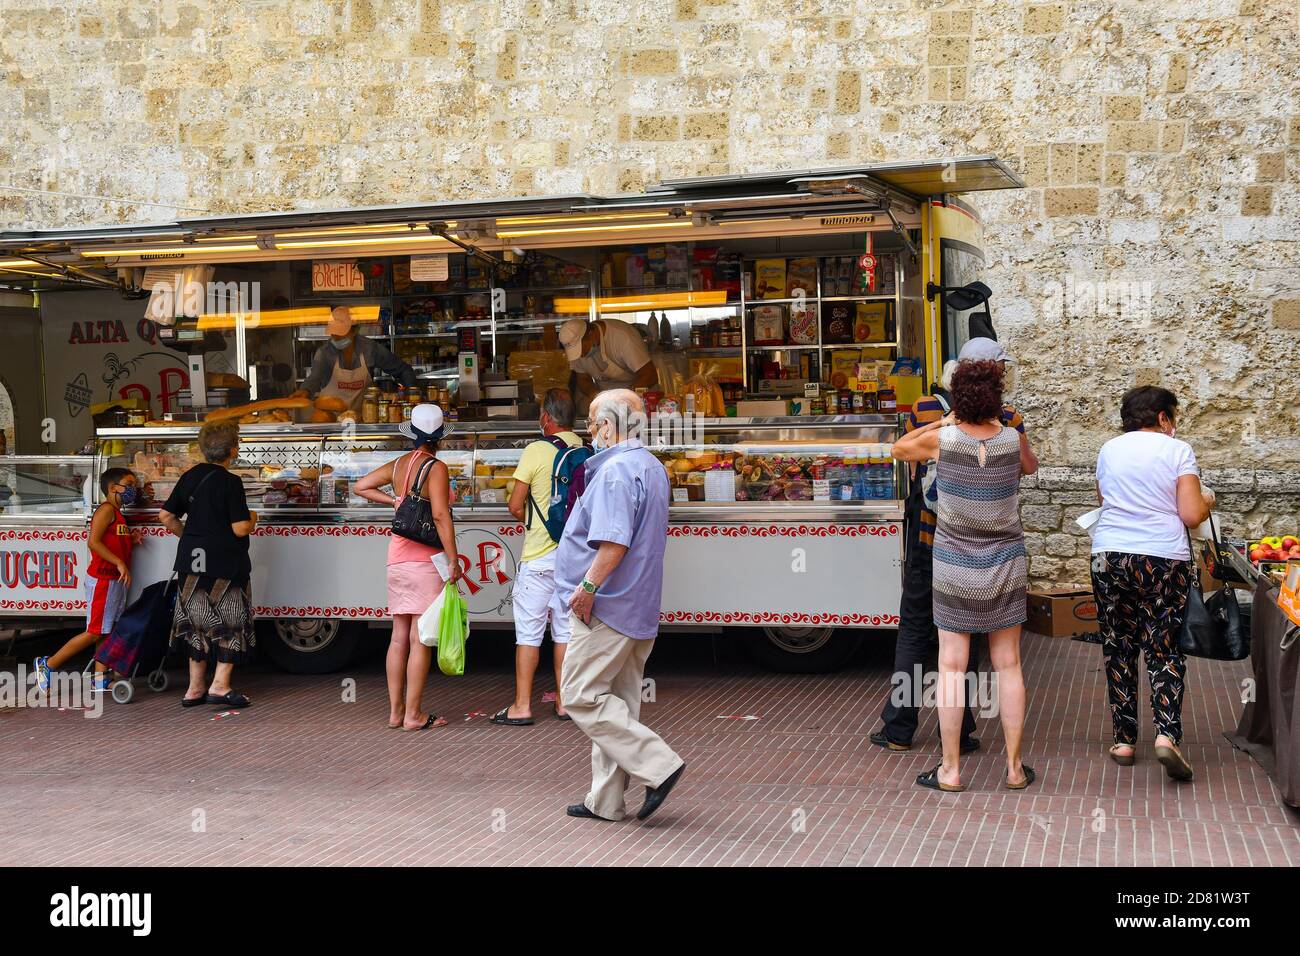 People shopping at a food market truck in the old town of San Gimignano, Unesco World Heritage Site, Siena, Tuscany, Italy Stock Photo